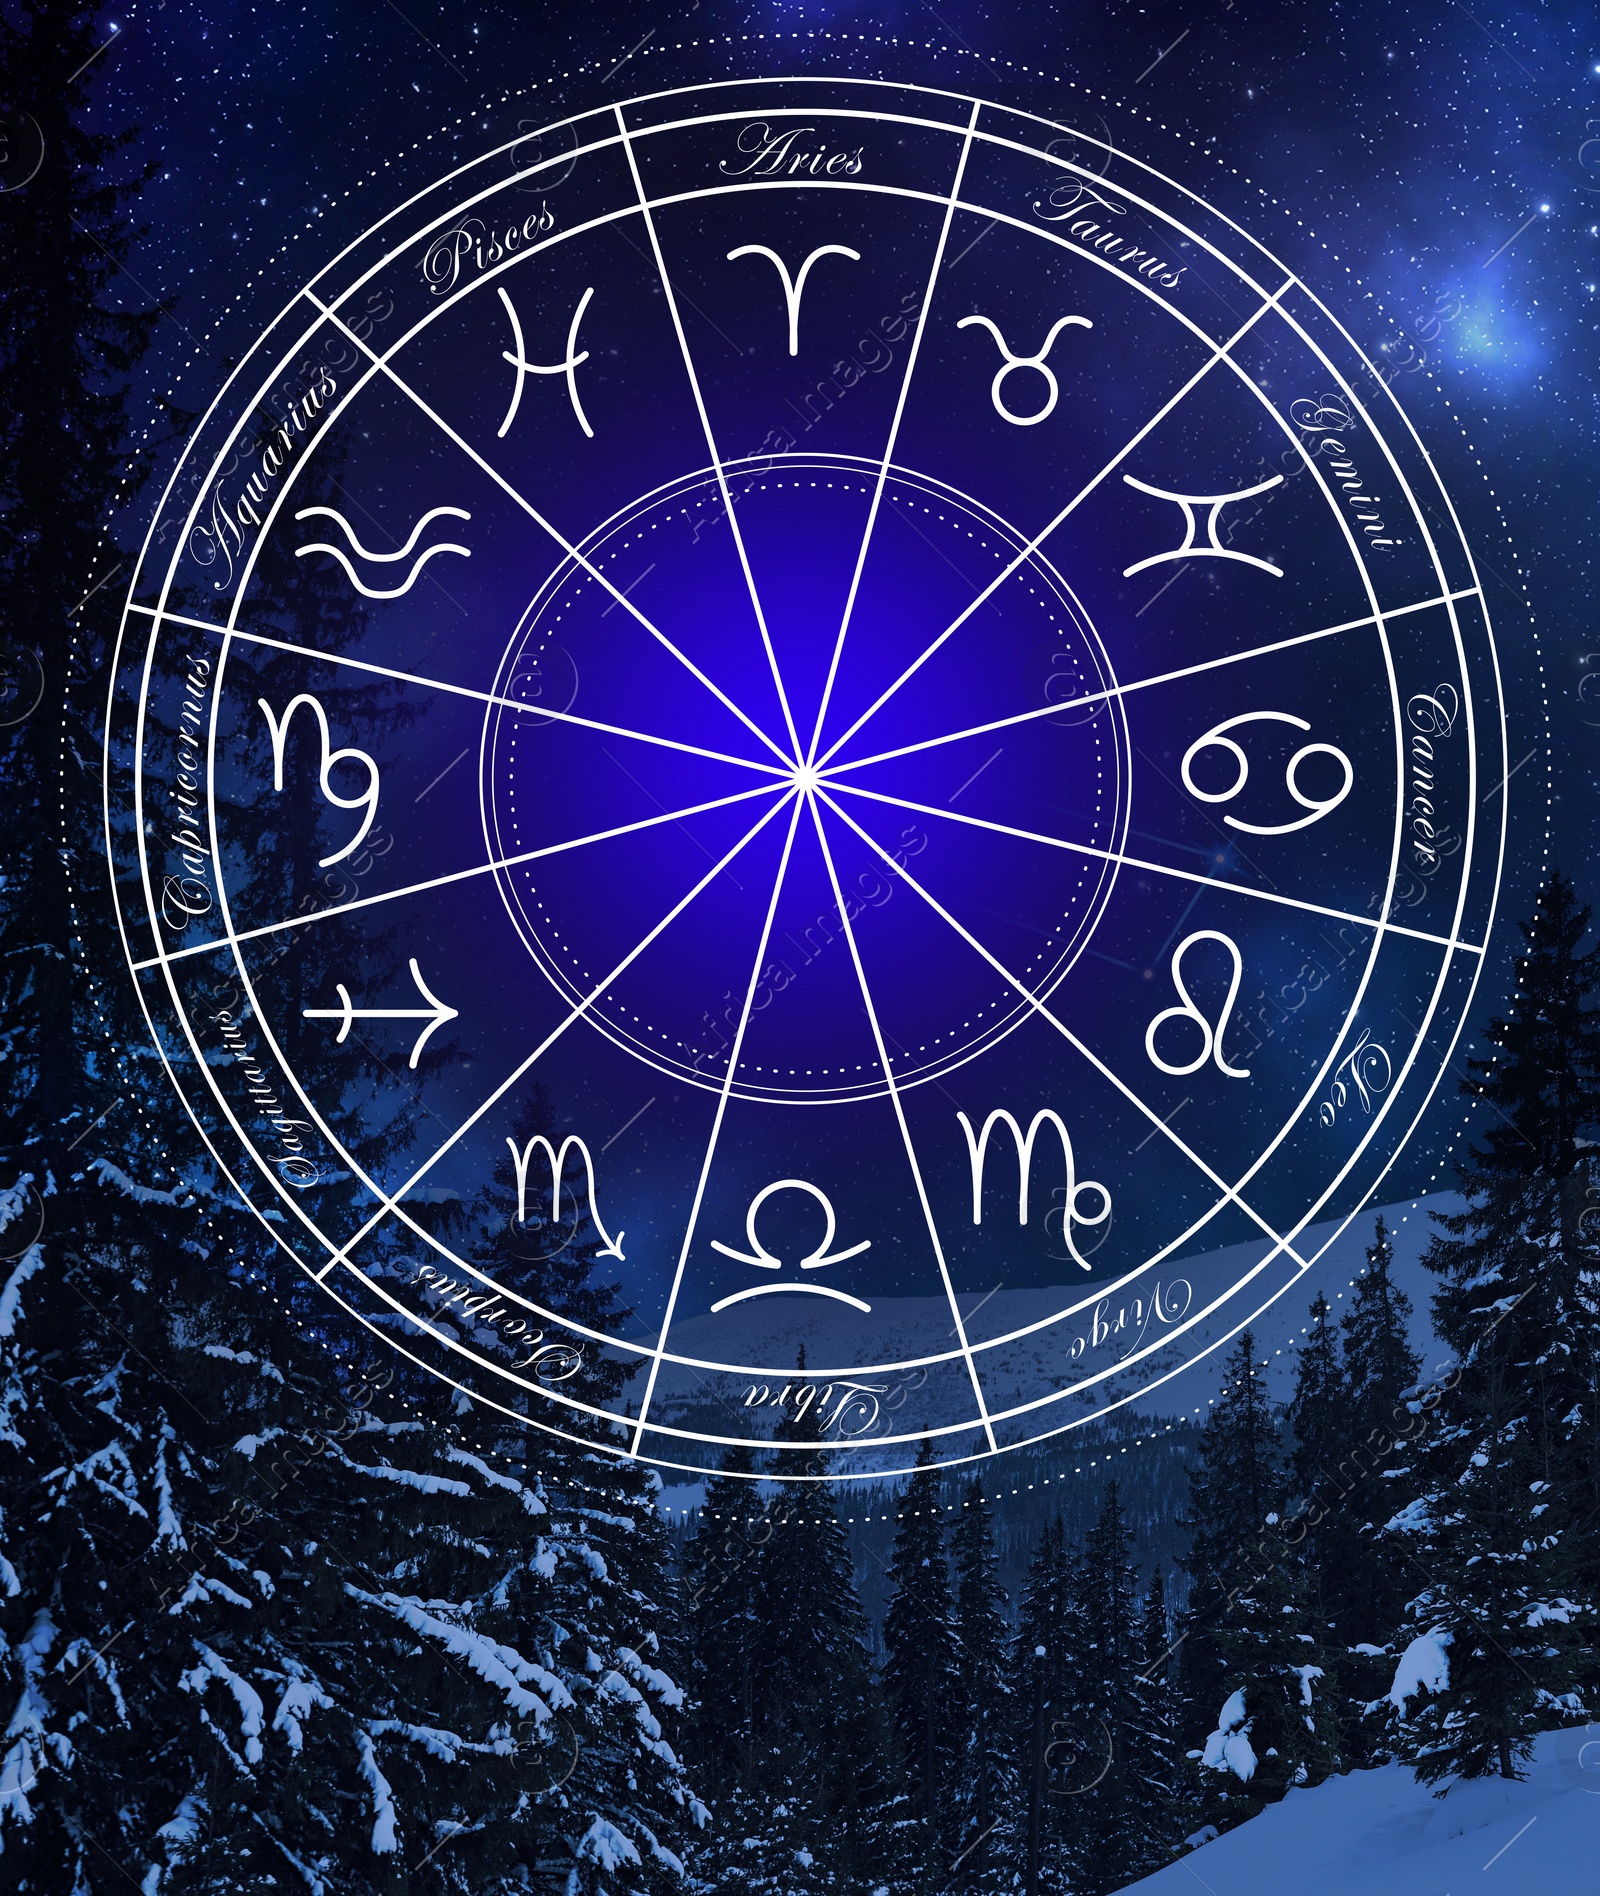 Image of Zodiac wheel showing 12 signs against mountain landscape